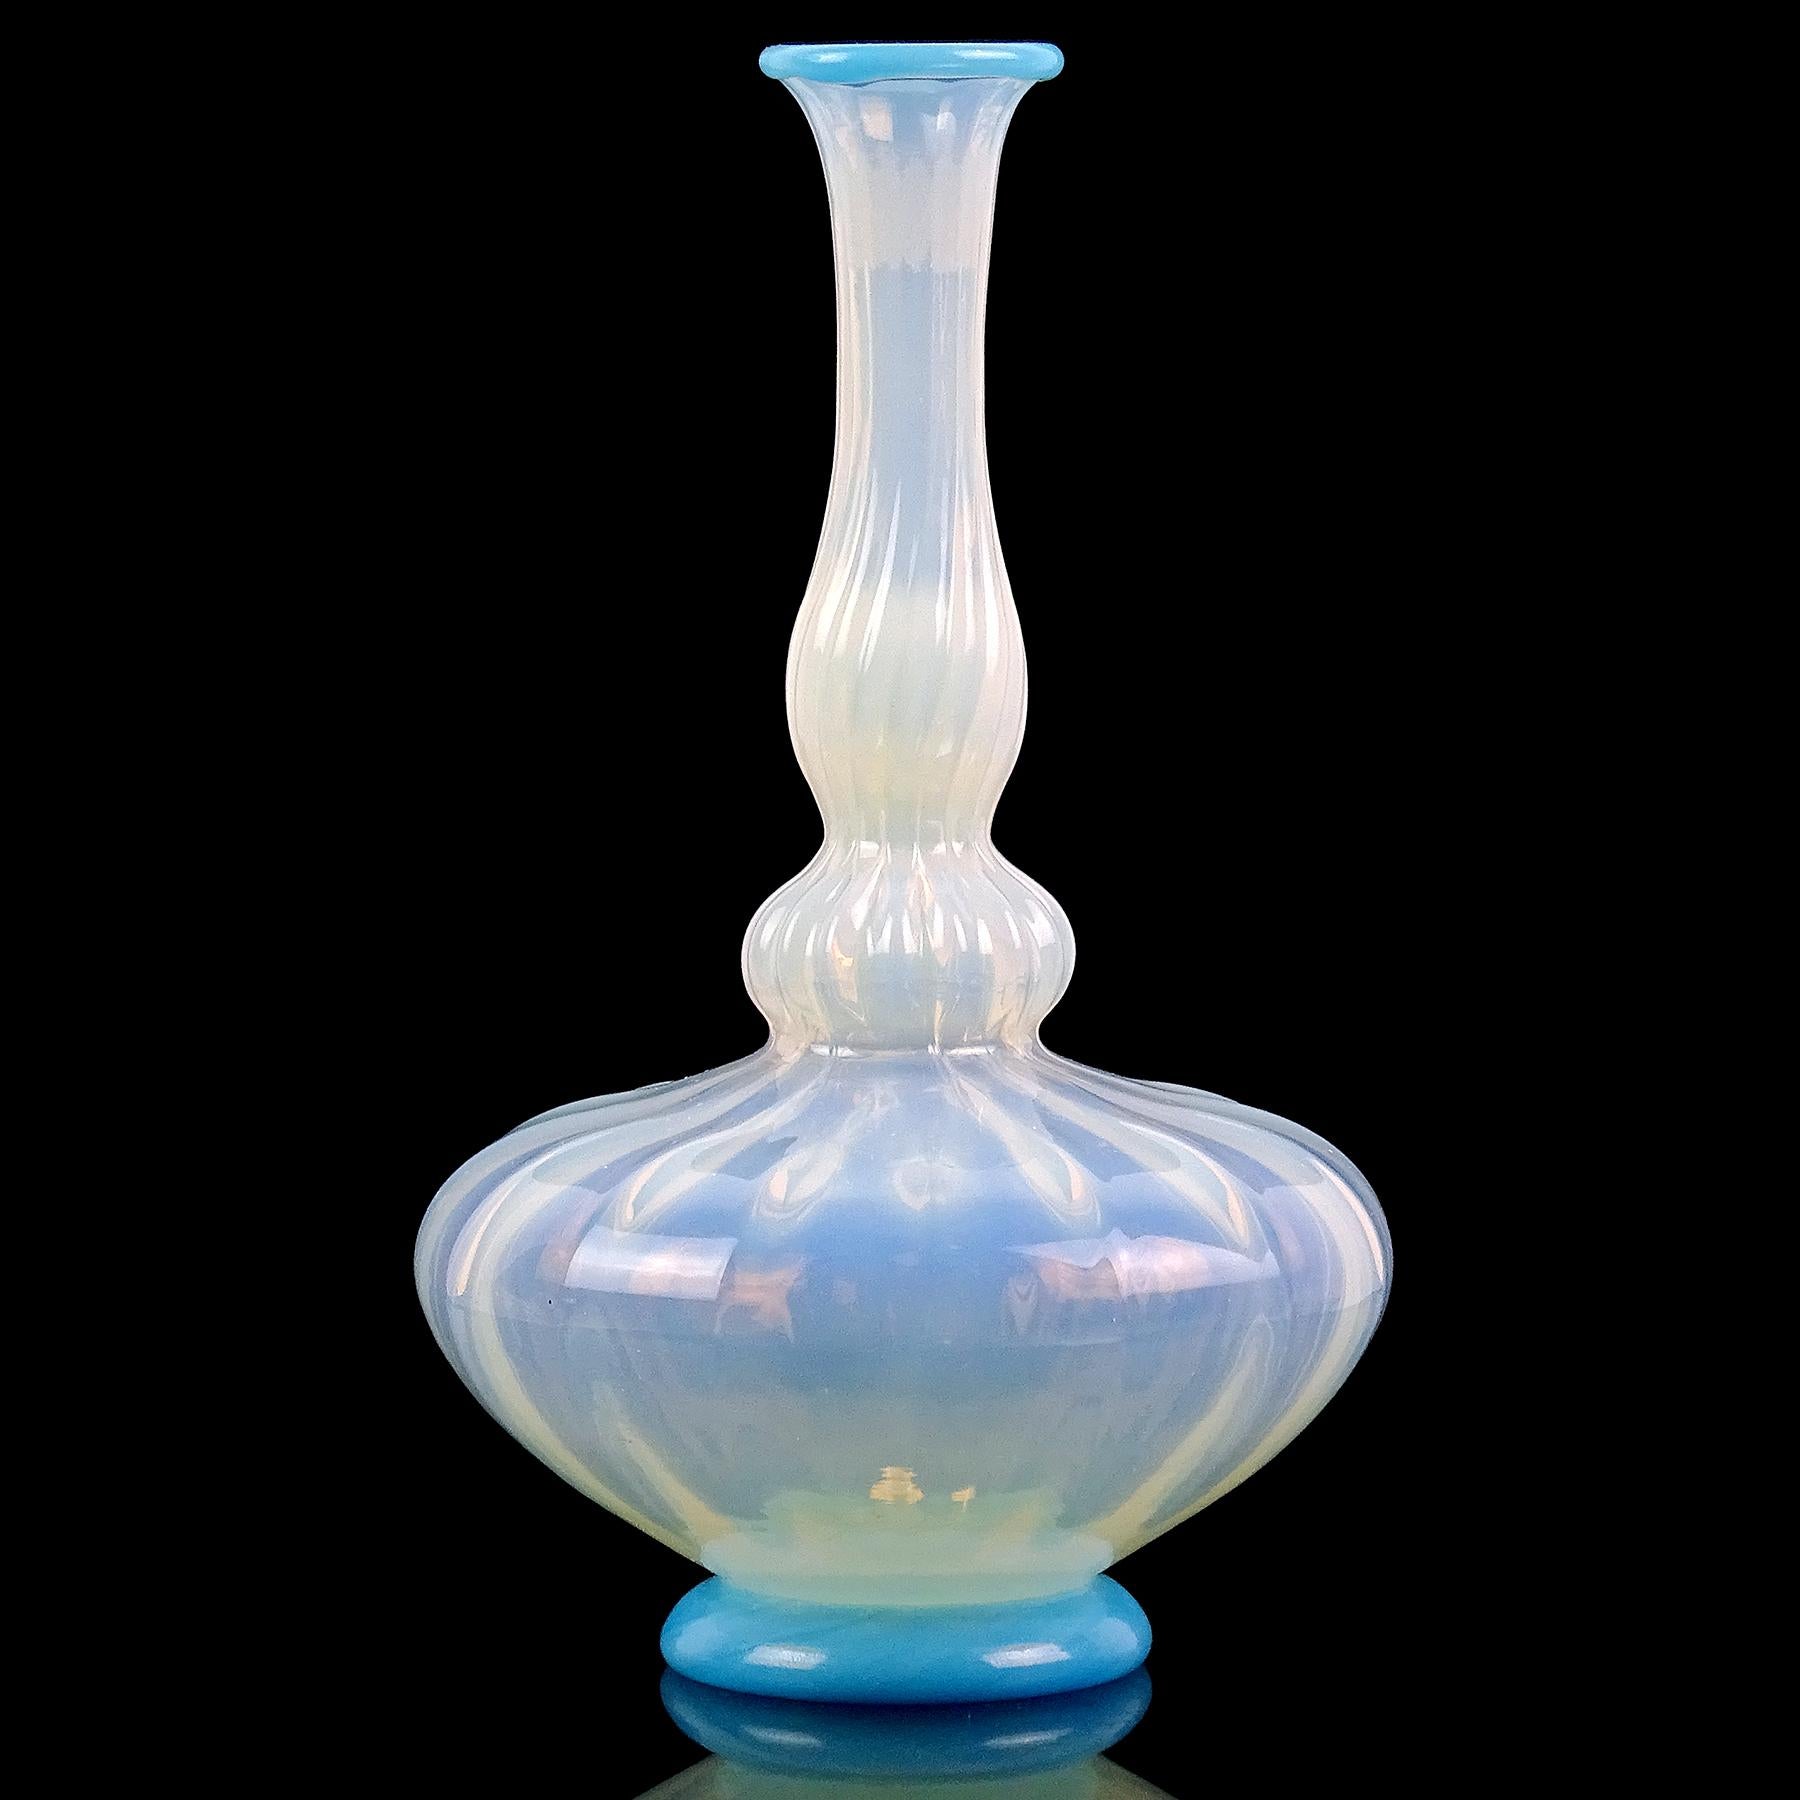 Beautiful antique Venetian / early Murano hand blown opalescent white and blue Italian art glass flower vase. It has a genie bottle shape, with pleated surface on the body. It has sky blue accents on the rim of the vase, and the bottom base. The